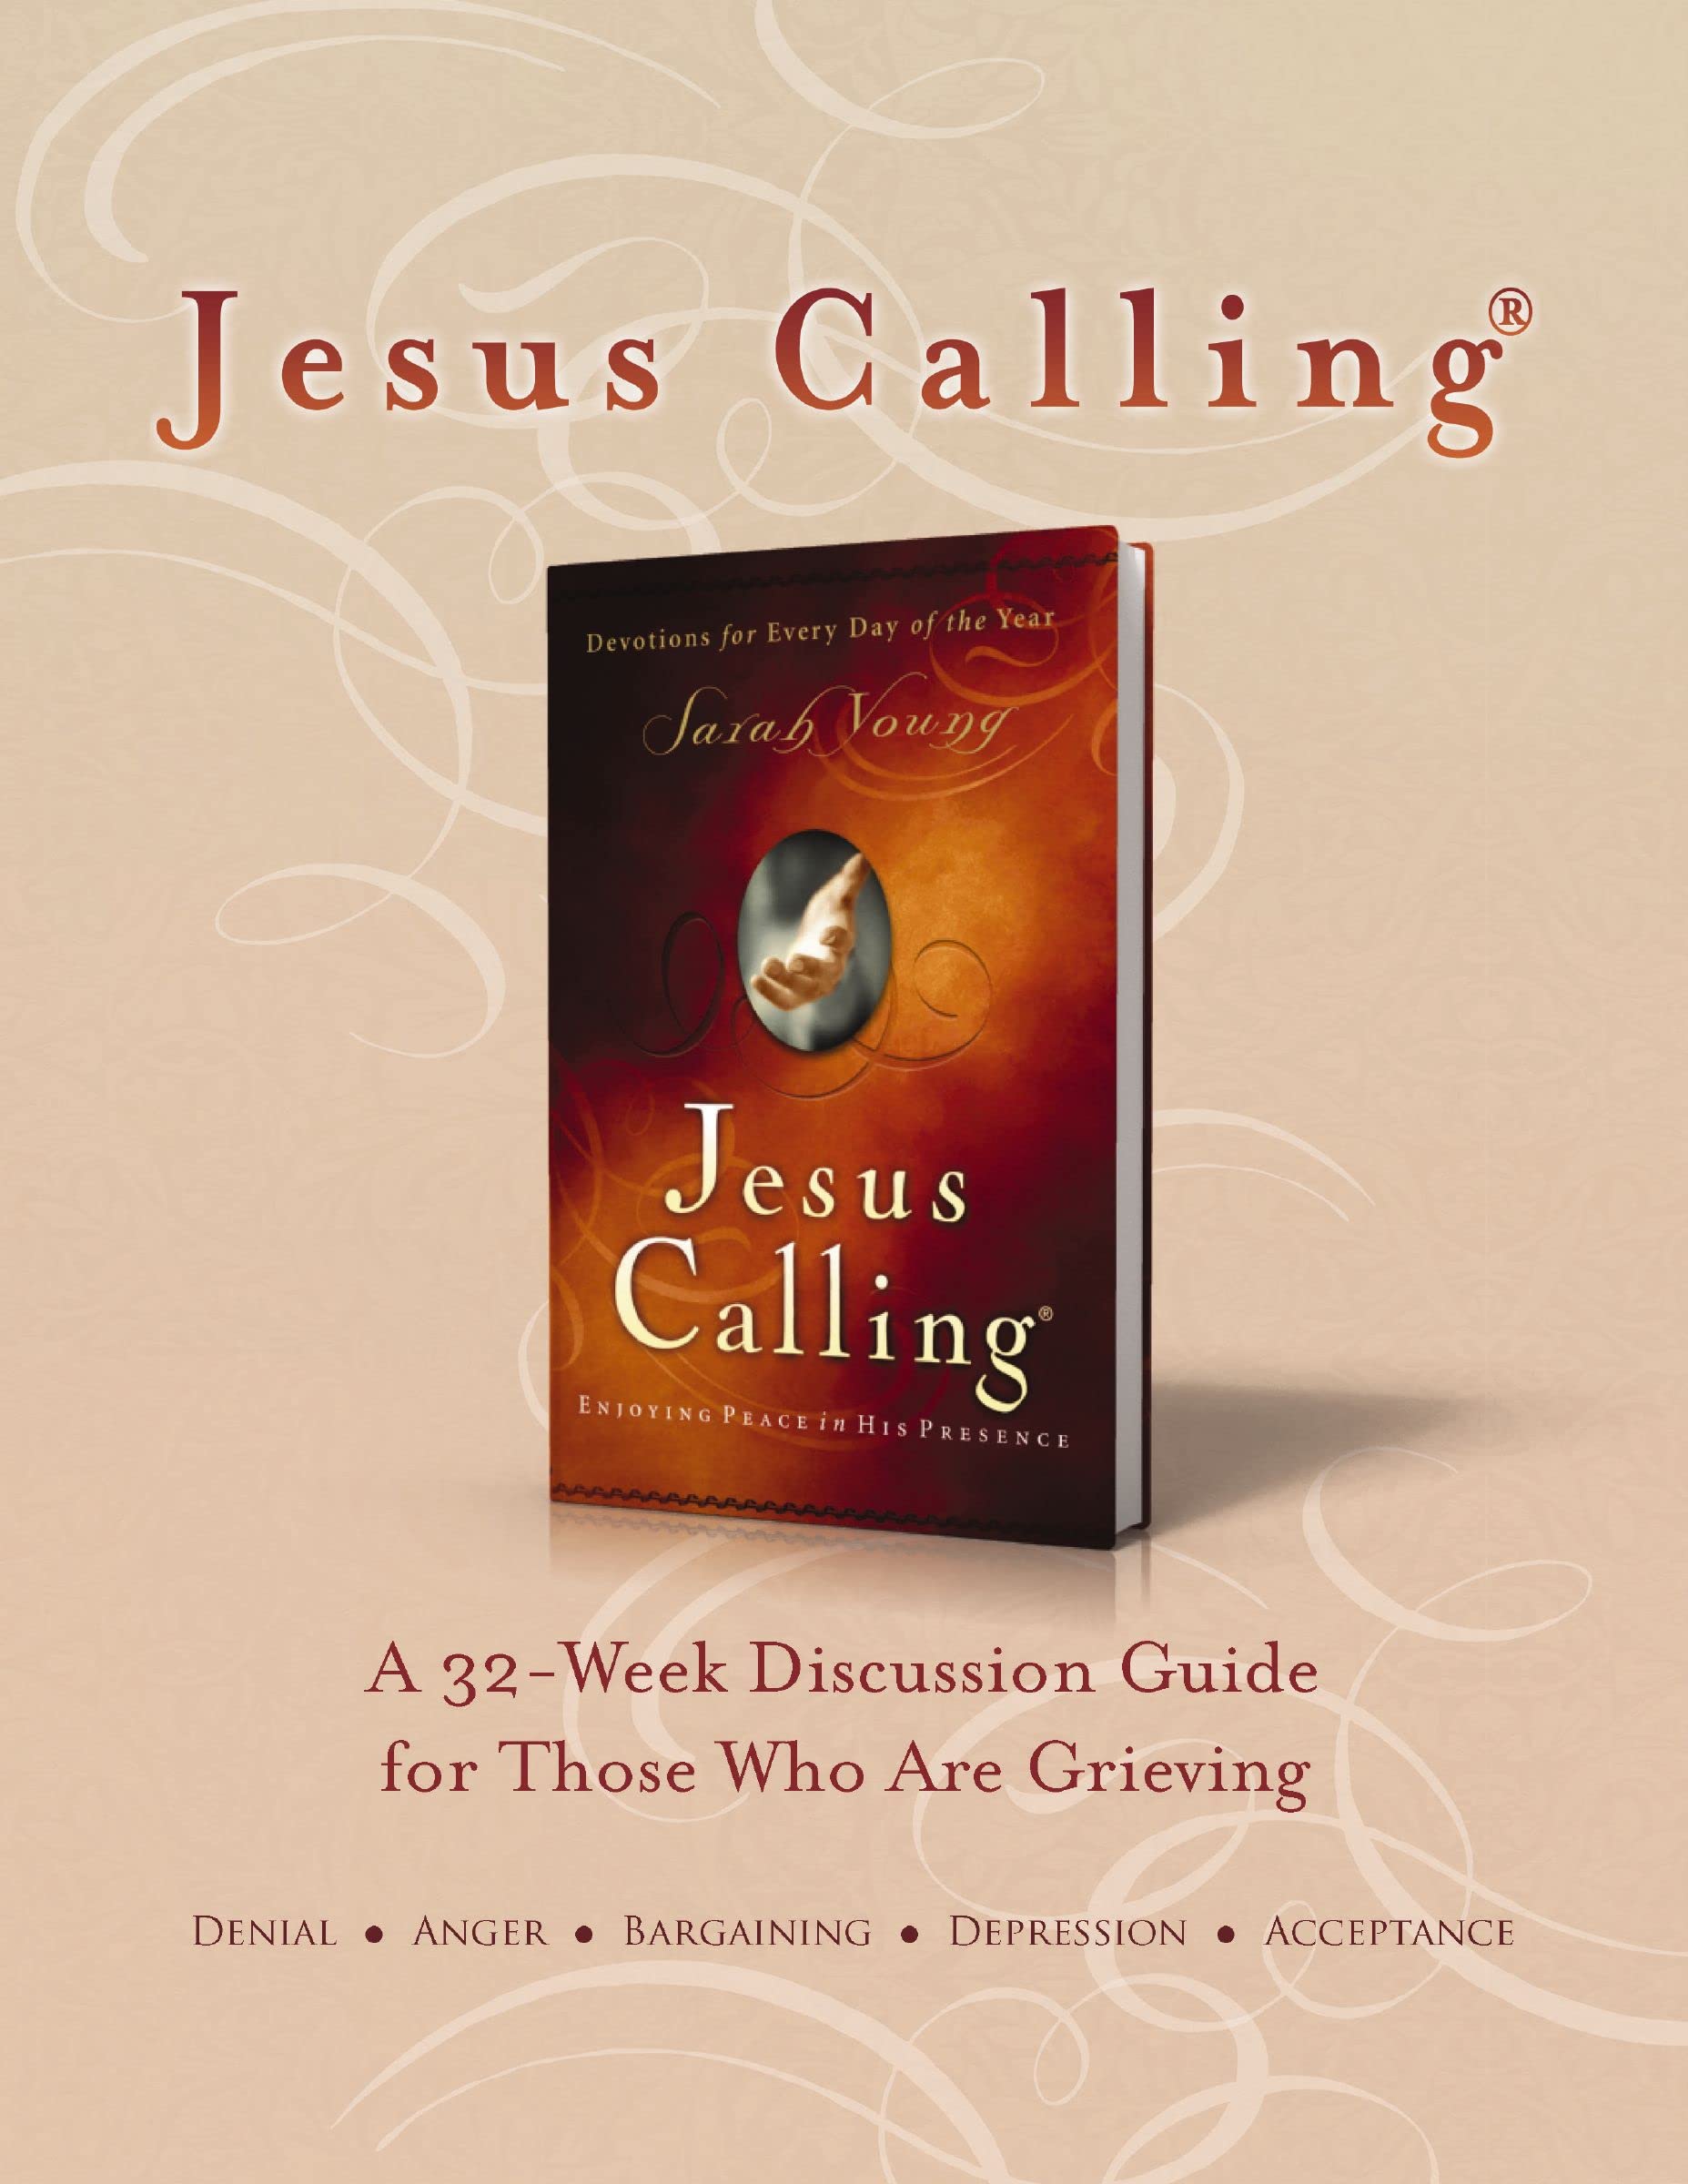 Jesus Calling Book Club Discussion Guide for Grief (Jesus Calling®)